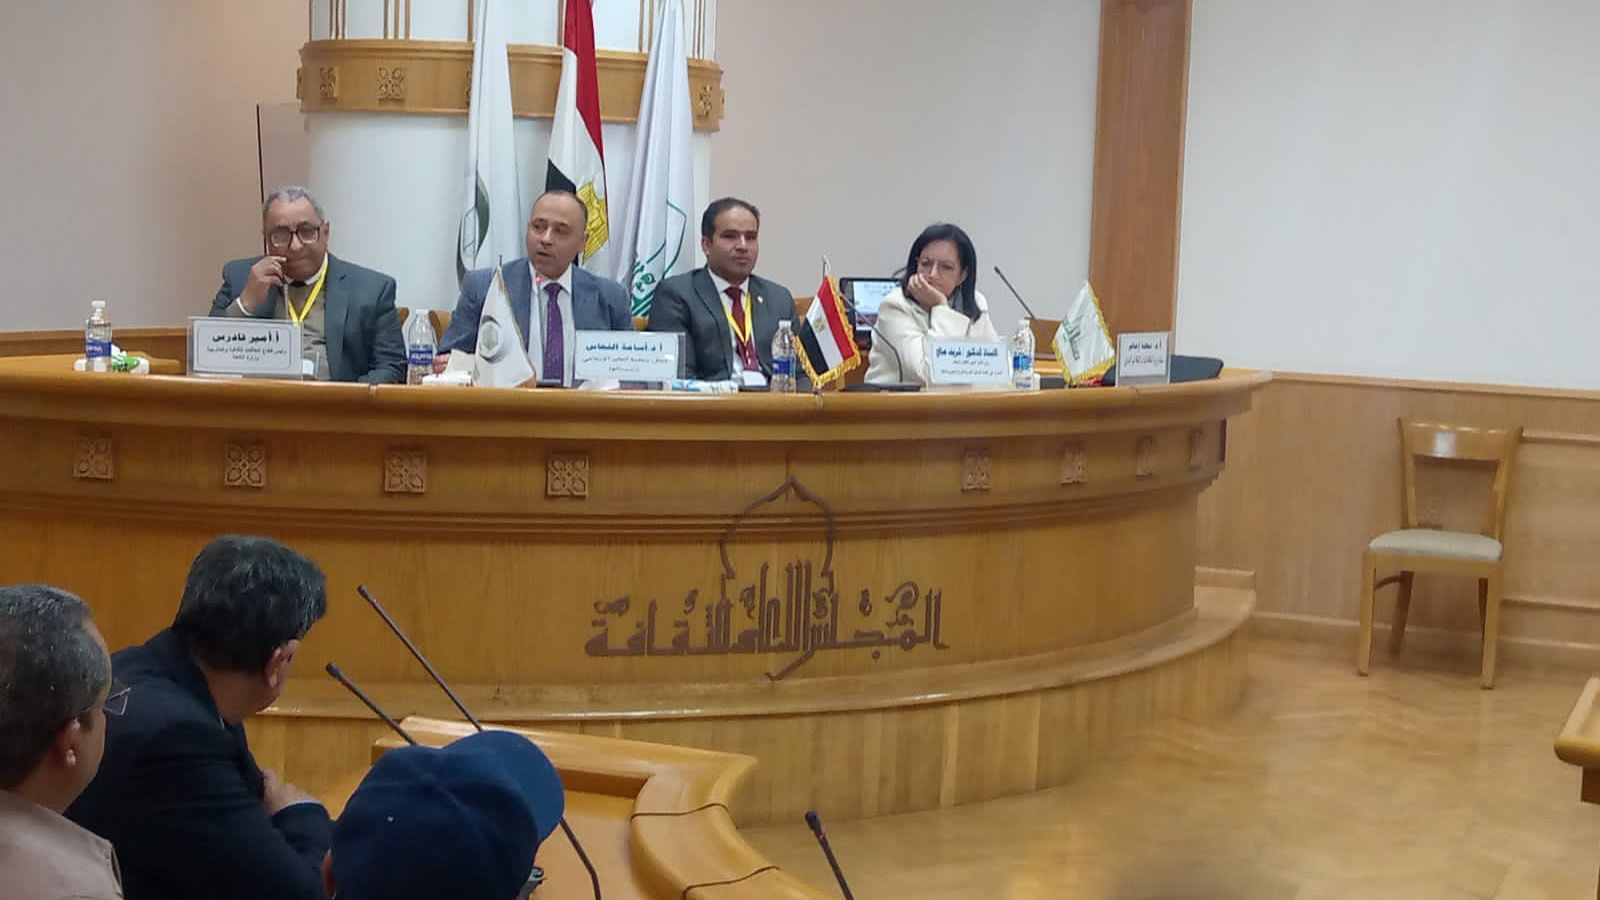 ICESCO and Egyptian Ministry of Culture hold training session for heritage professionals in Egypt and Yemen